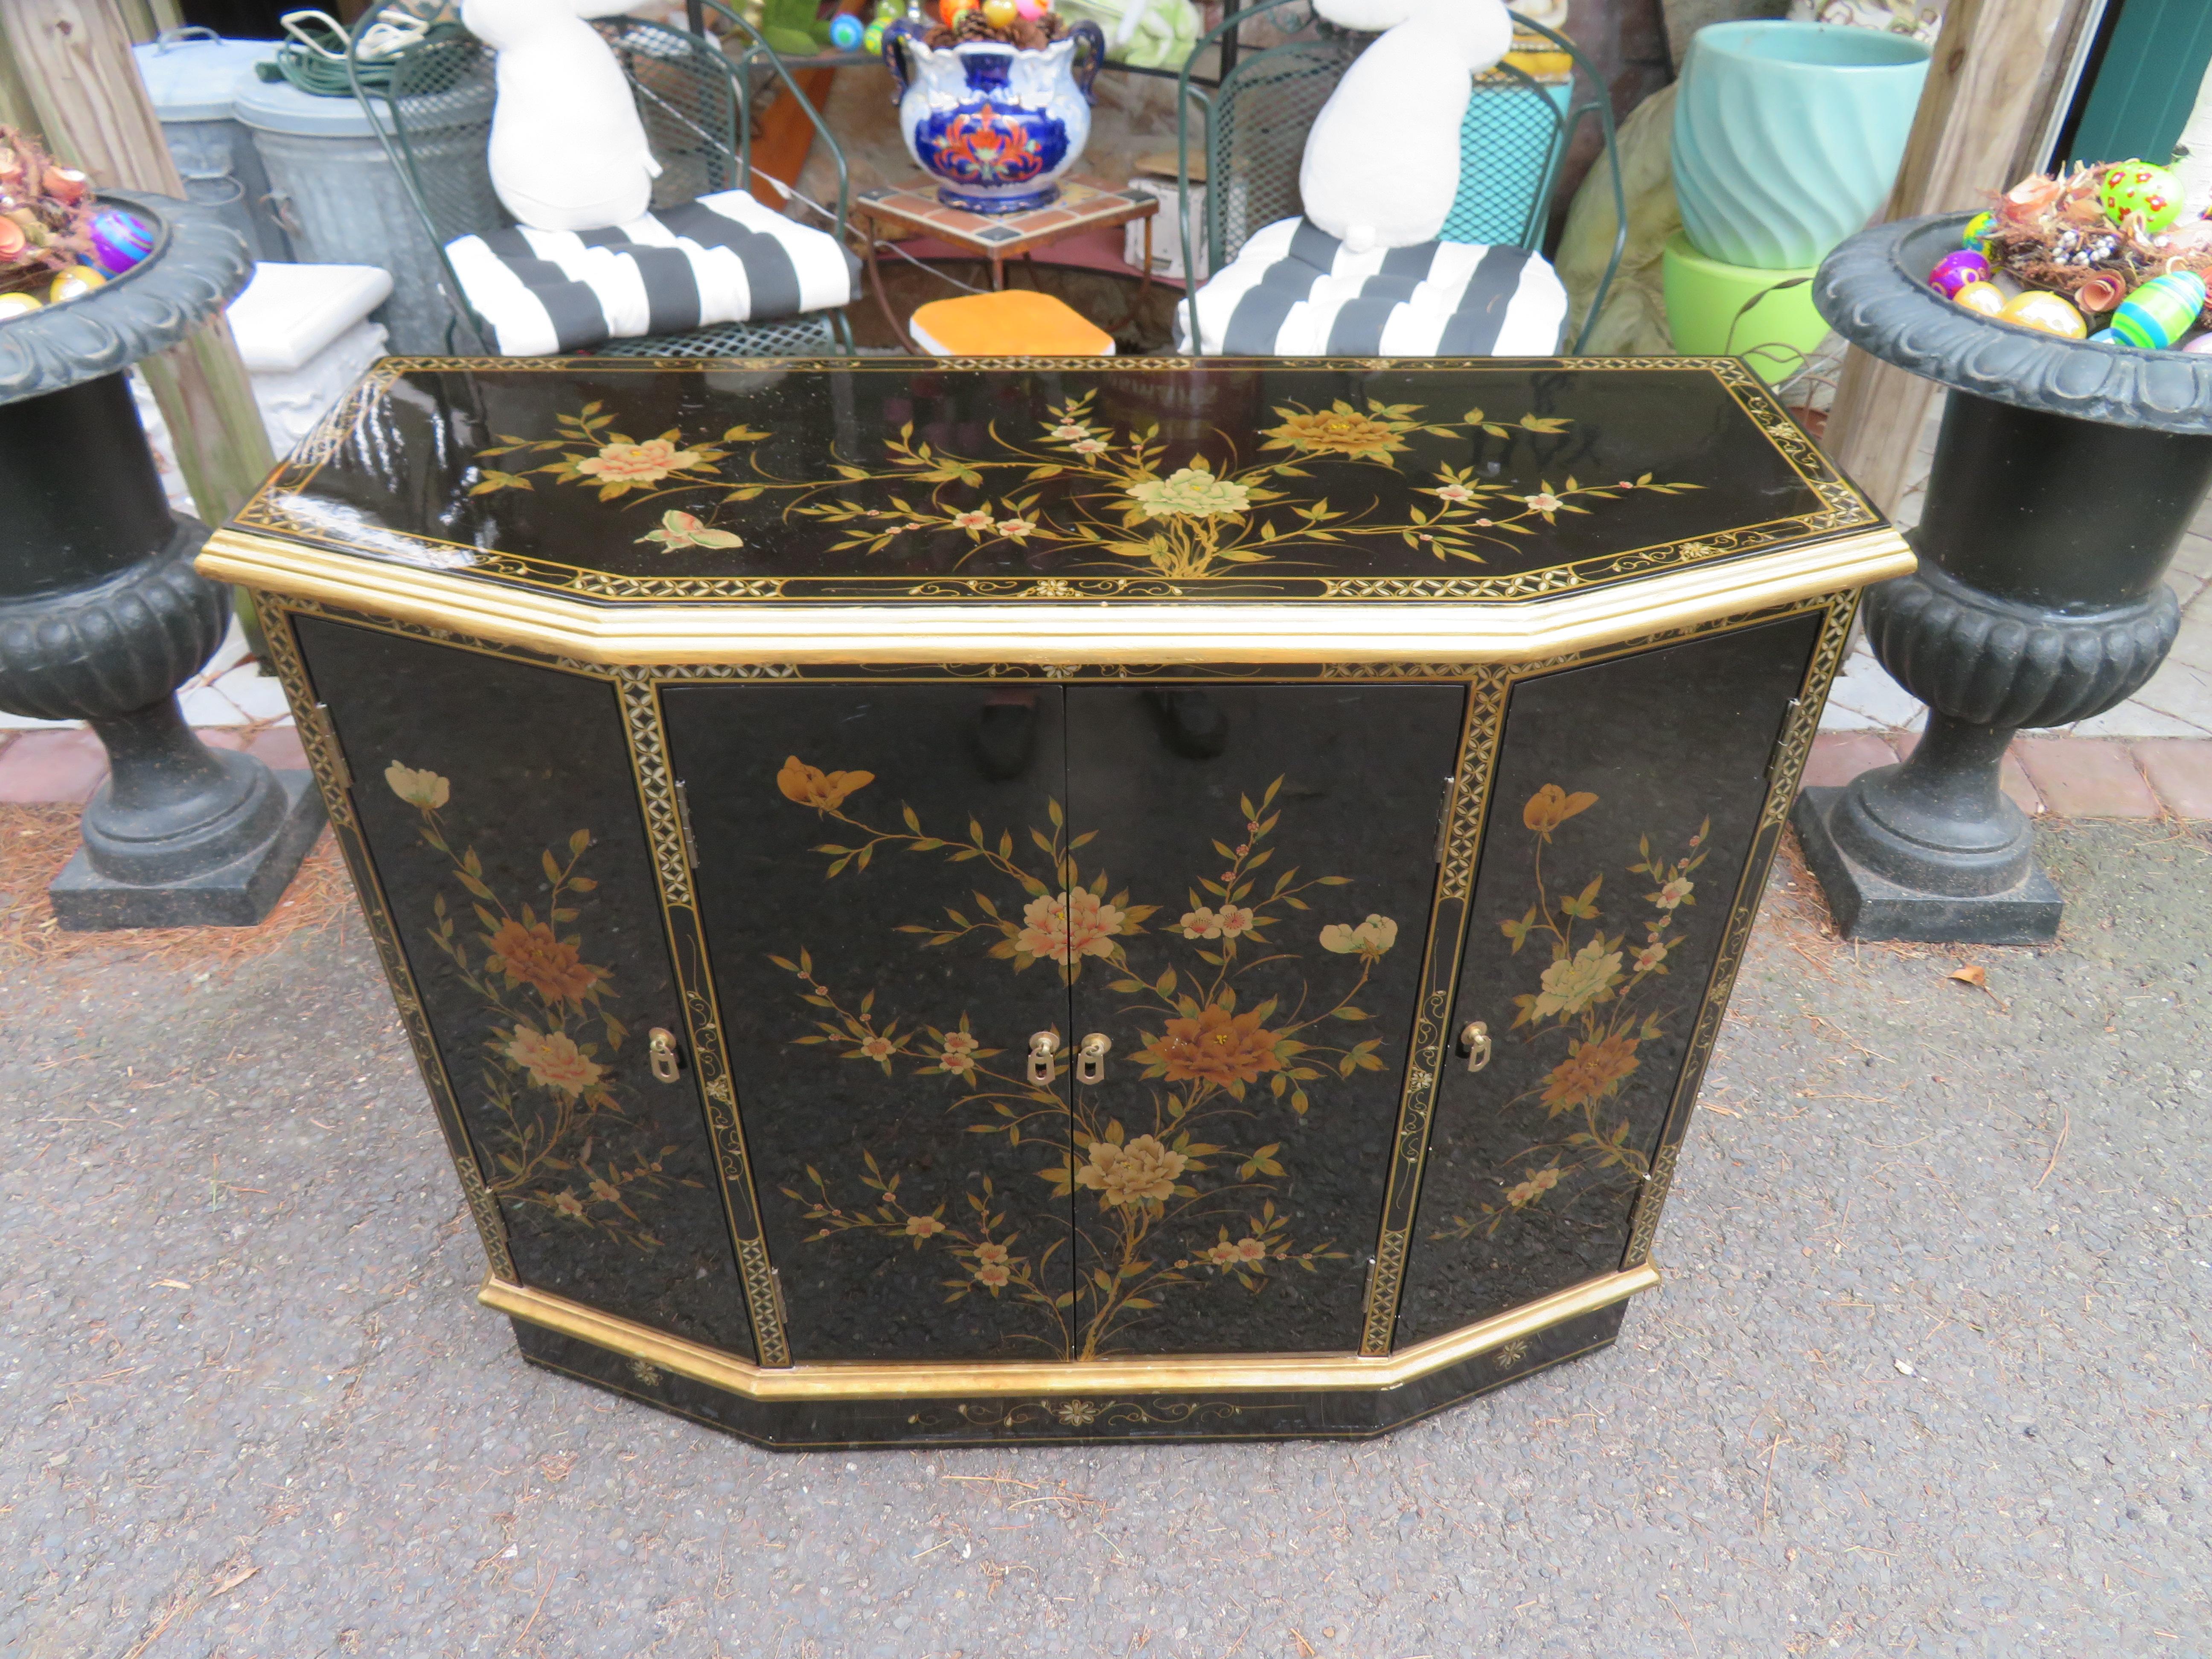 Marvelous Chinoiserie decorated black and gold console cabinet, Circa 60's. This lovely piece was well cared for and looks rarely used. The floral decoration is well-painted and is done on all sides including the back. It measures 32